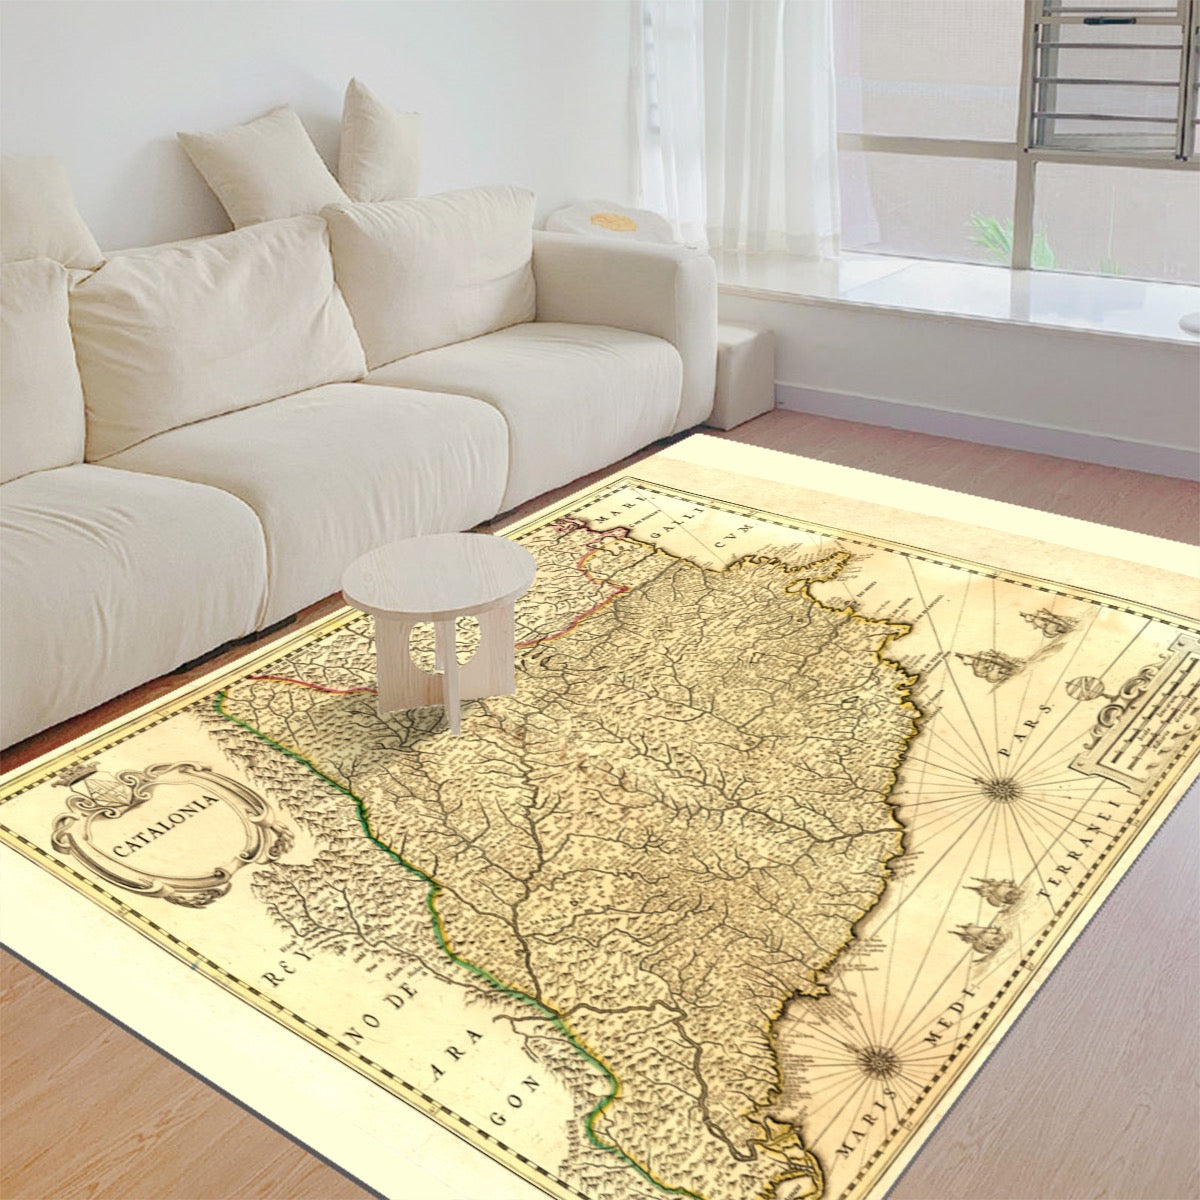 Vintage Map of Catalonia anno 1638 Floor Mat - Posterify